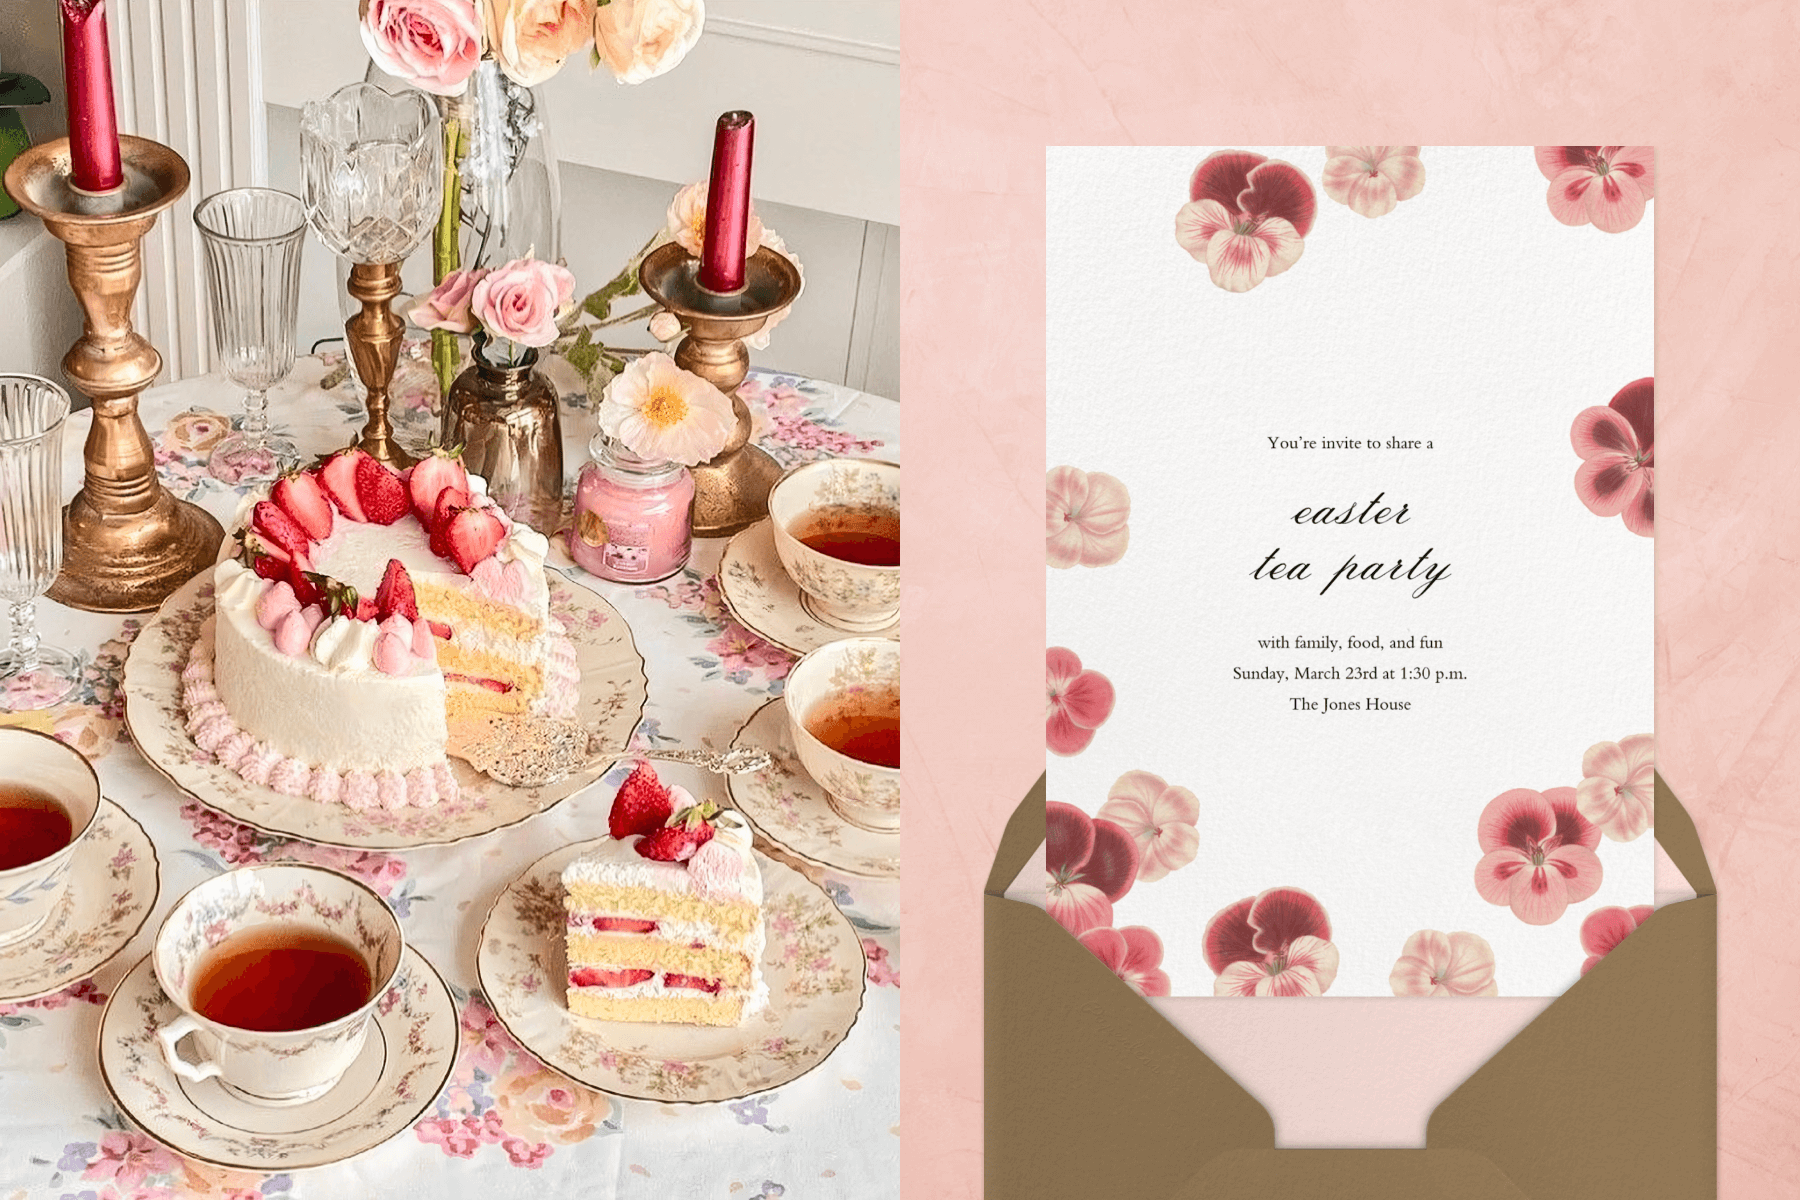 Left: A preppy pink tea party scene with a cake, tea cups, and candles; Right: An Easter invitation with illustrations of pansies.